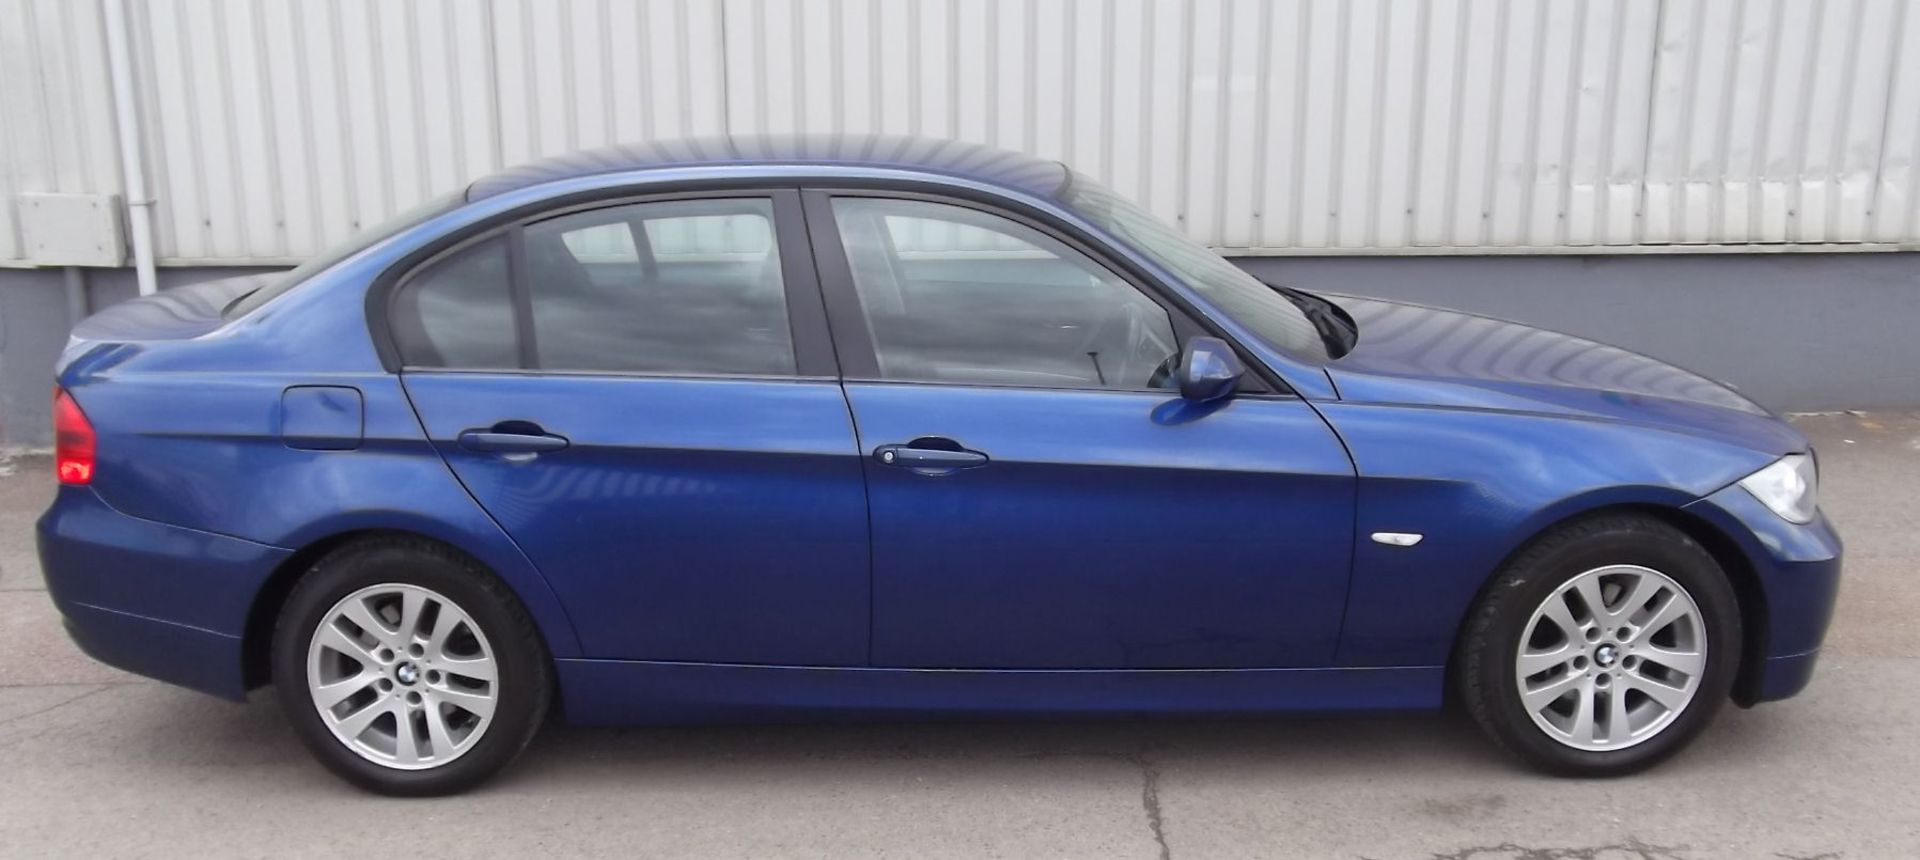 2007 BMW 318i SE 4 Door Saloon - CL505 - NO VAT ON THE HAMMER - Location: Corby - Image 7 of 11